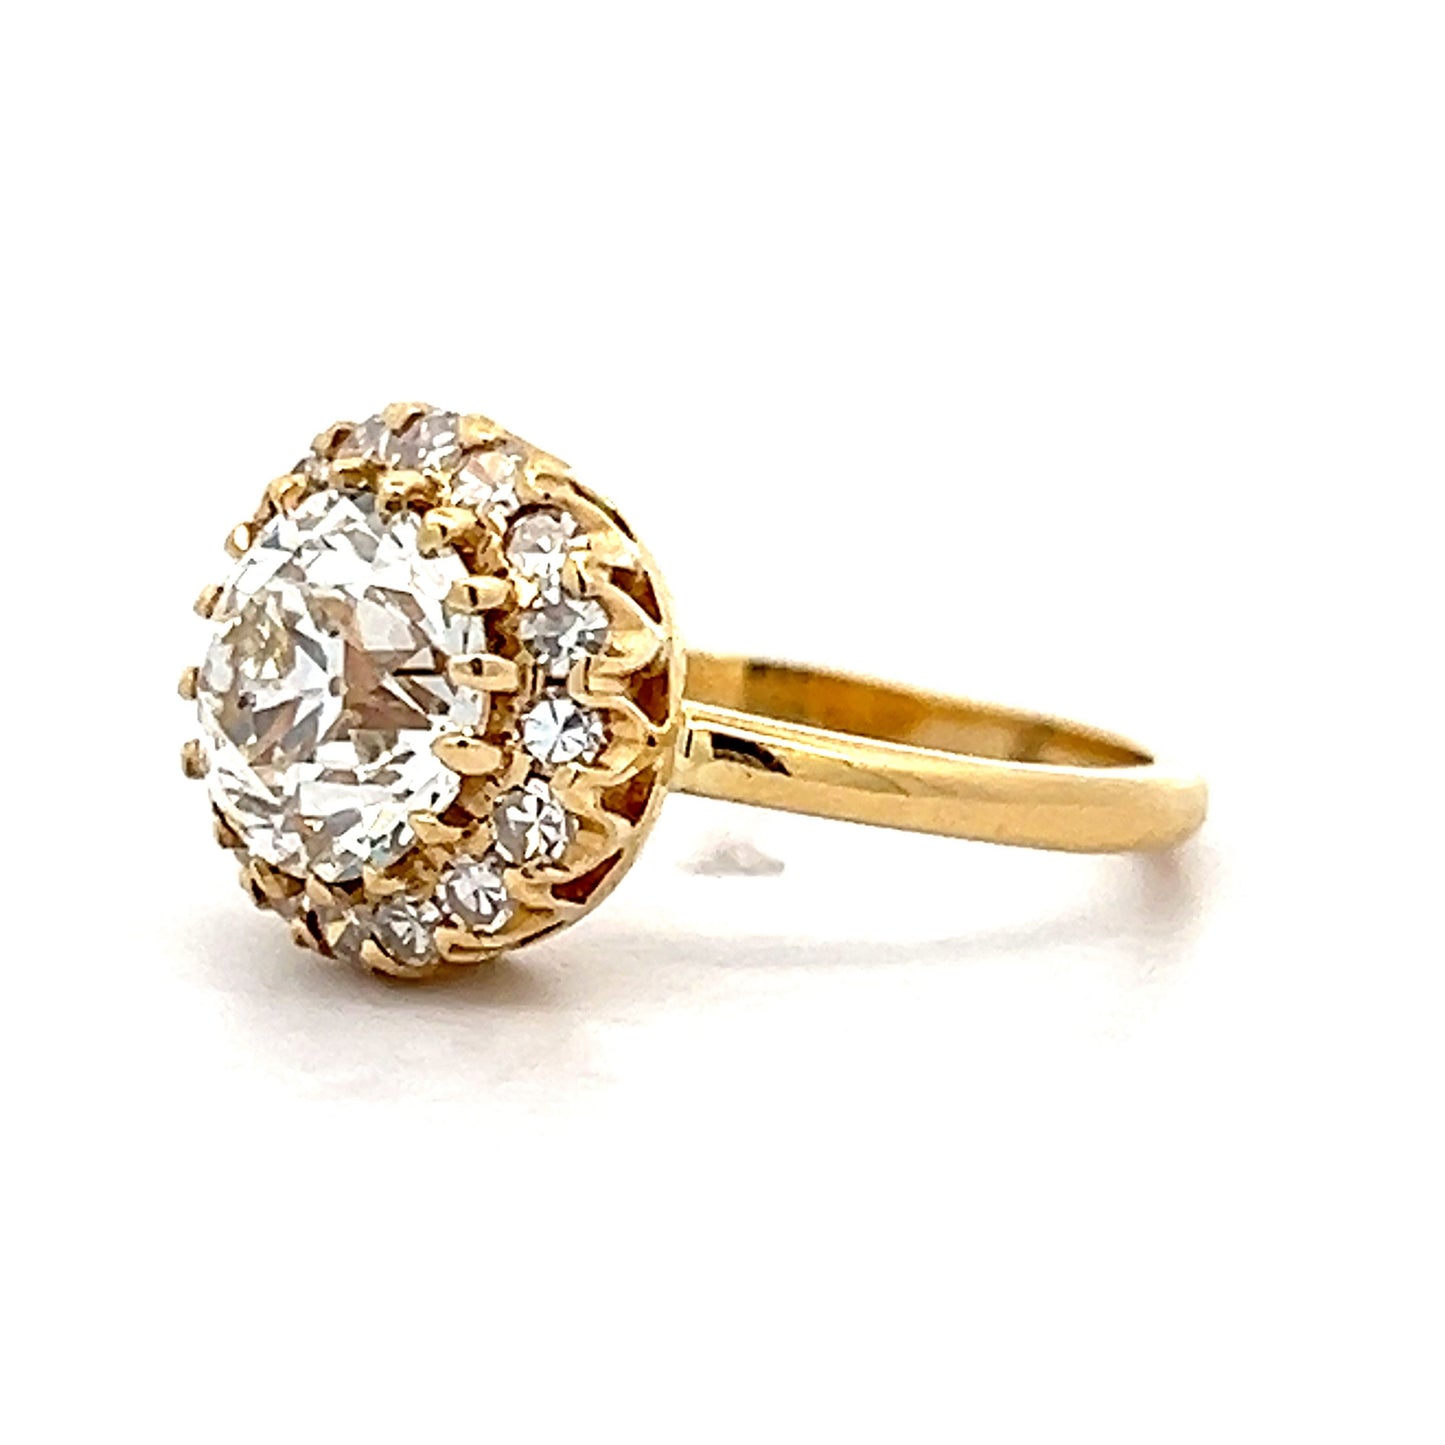 2.16 Victorian Diamond Halo Engagement Ring in 18k Yellow Gold